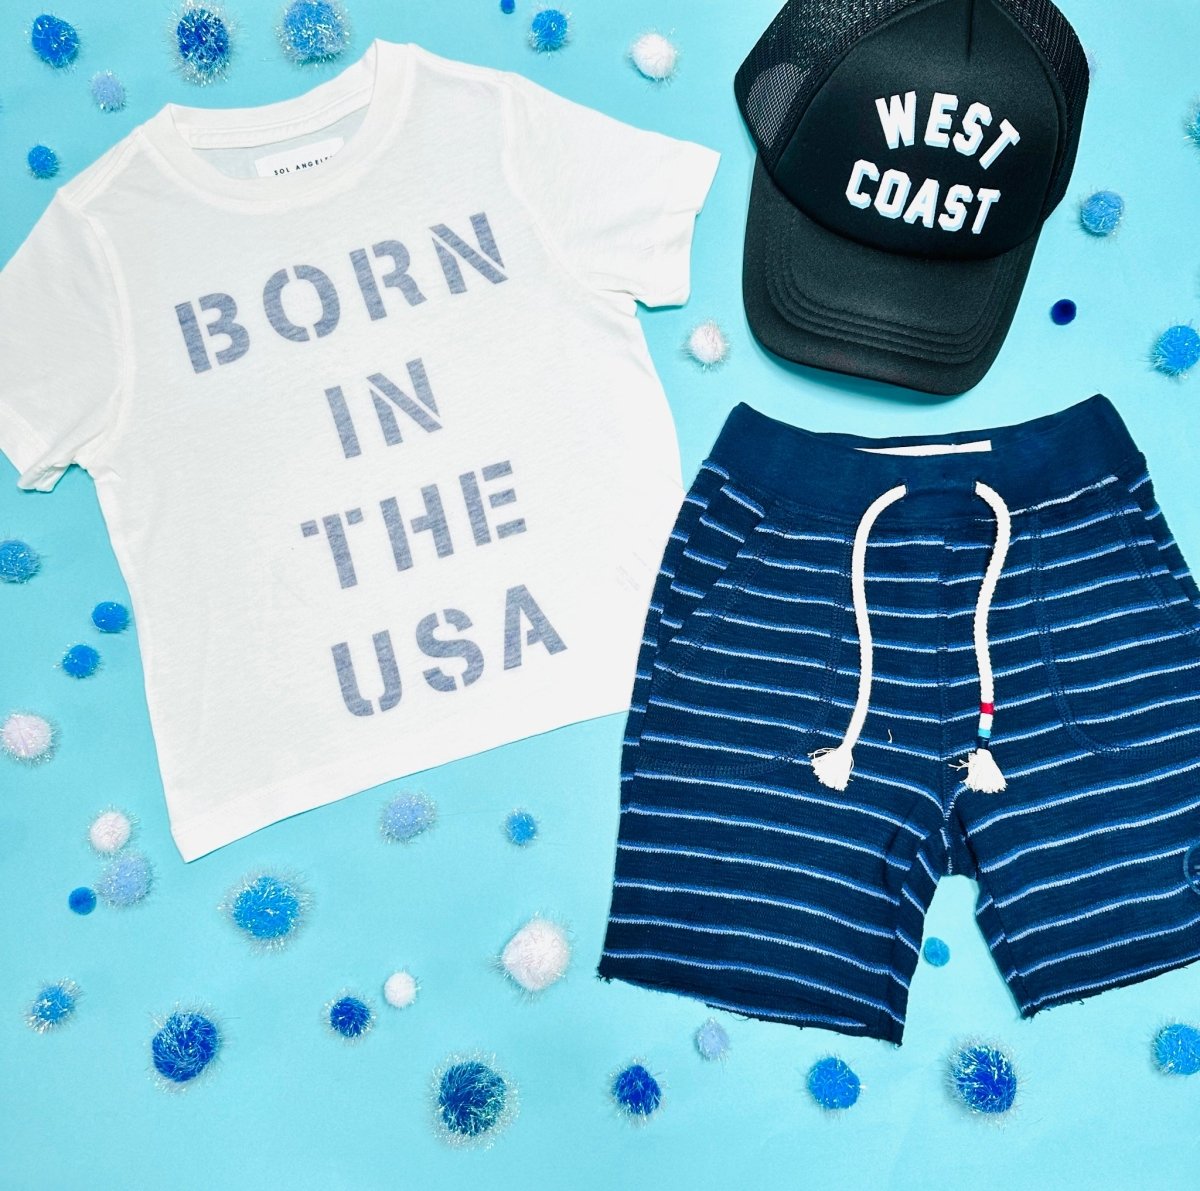 BORN IN THE USA TSHIRT - SOL ANGELES KIDS